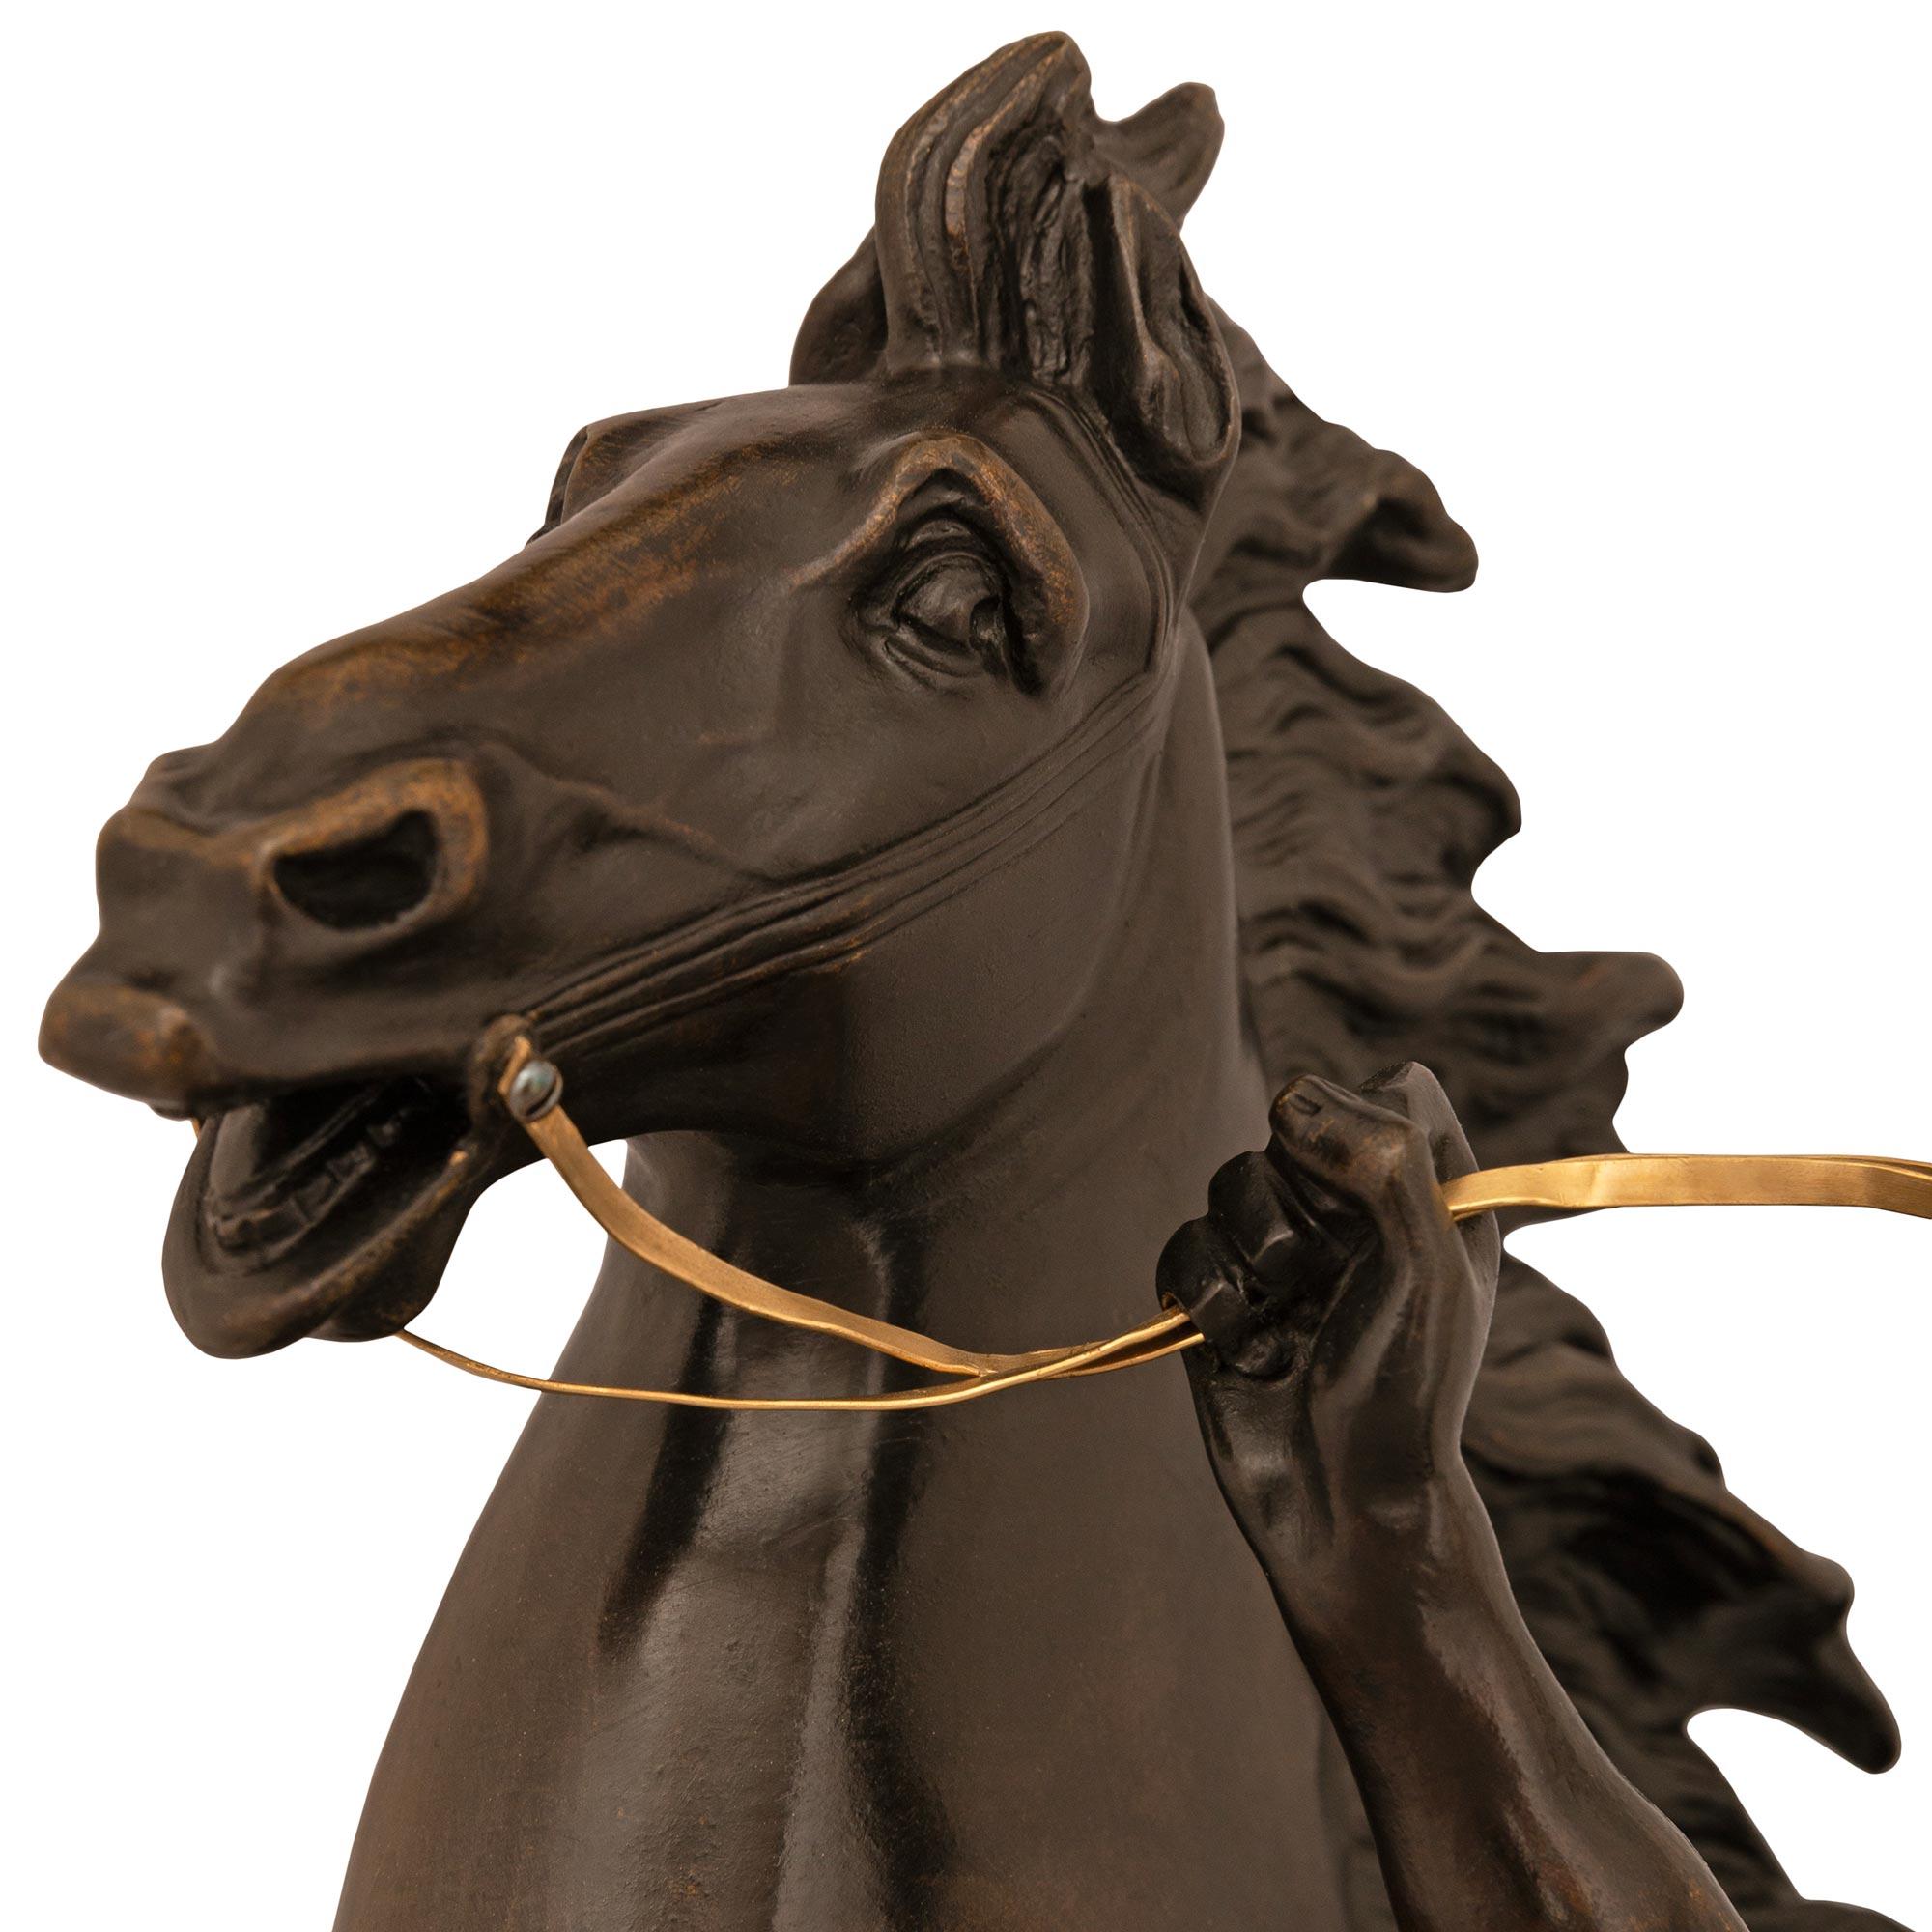 An impressive and majestic French 19th century patinated Bronze and Ormolu statue of a horse and groom, modeled after the horses of Marly. The spectacular horse is draped in a saddle blanket and displays a wonderful flowing mane and tail while